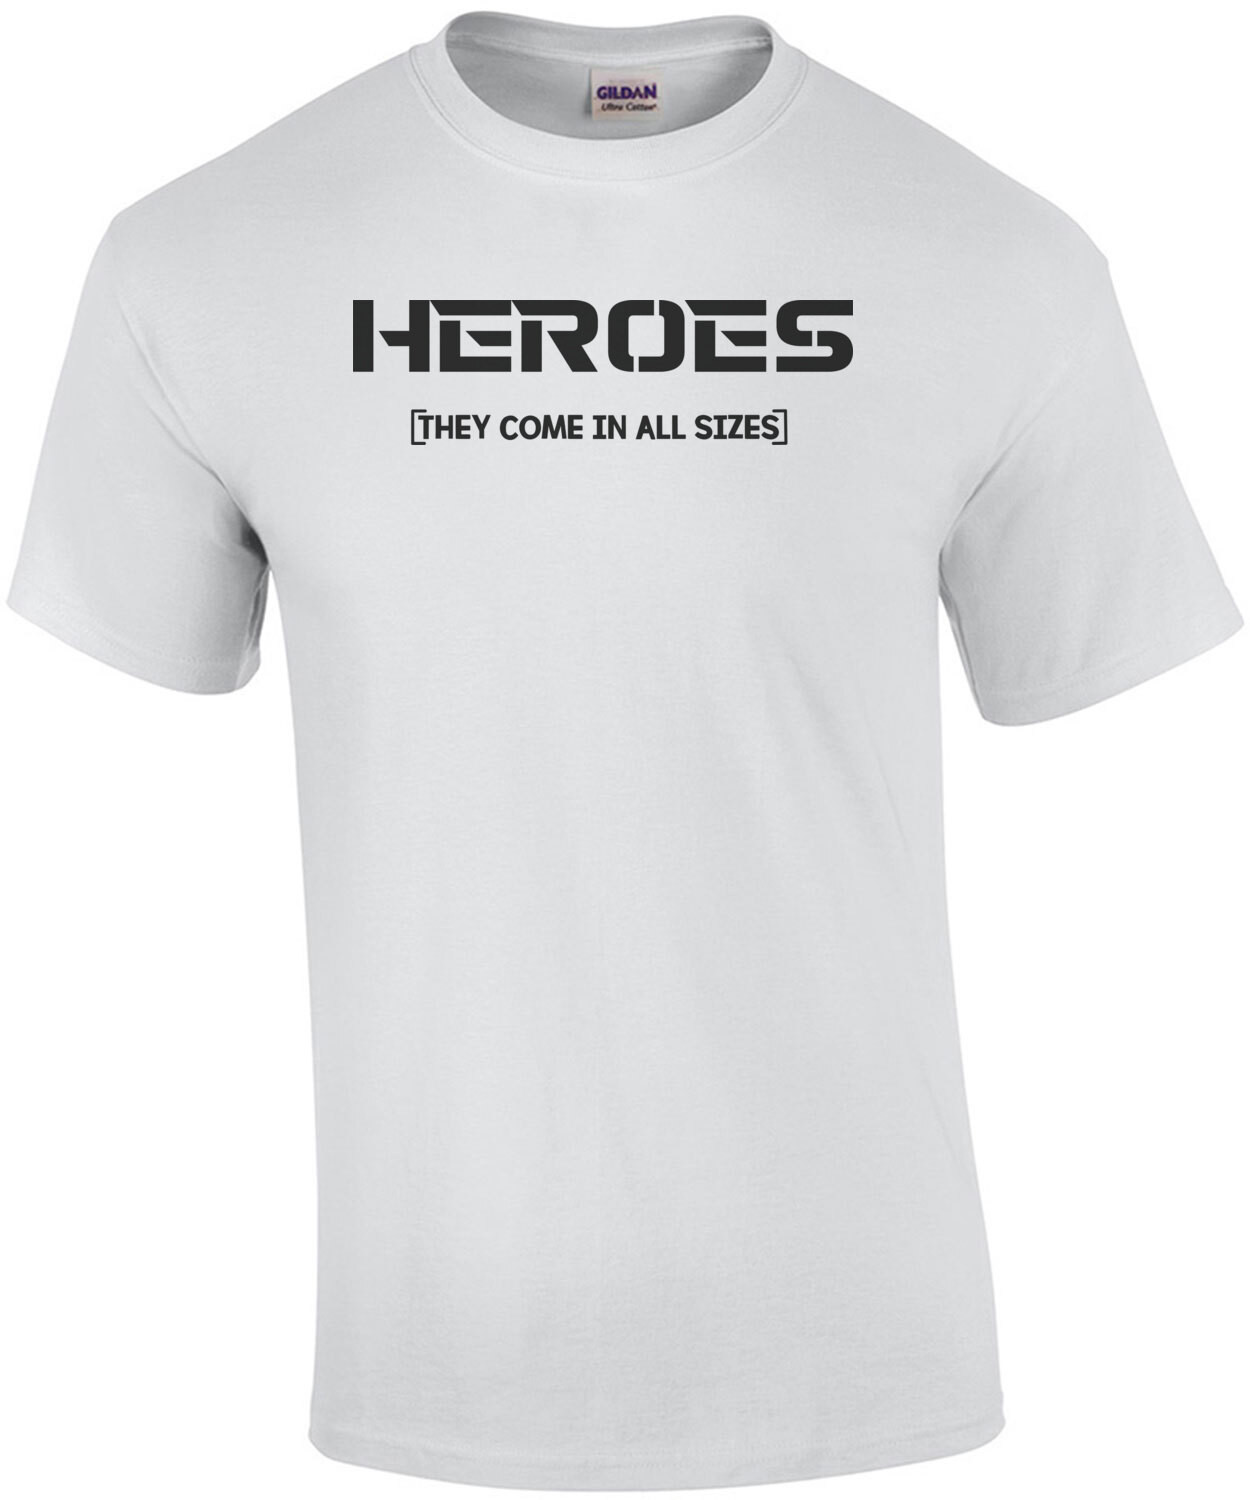 Heroes Come In All Sizes T-Shirt